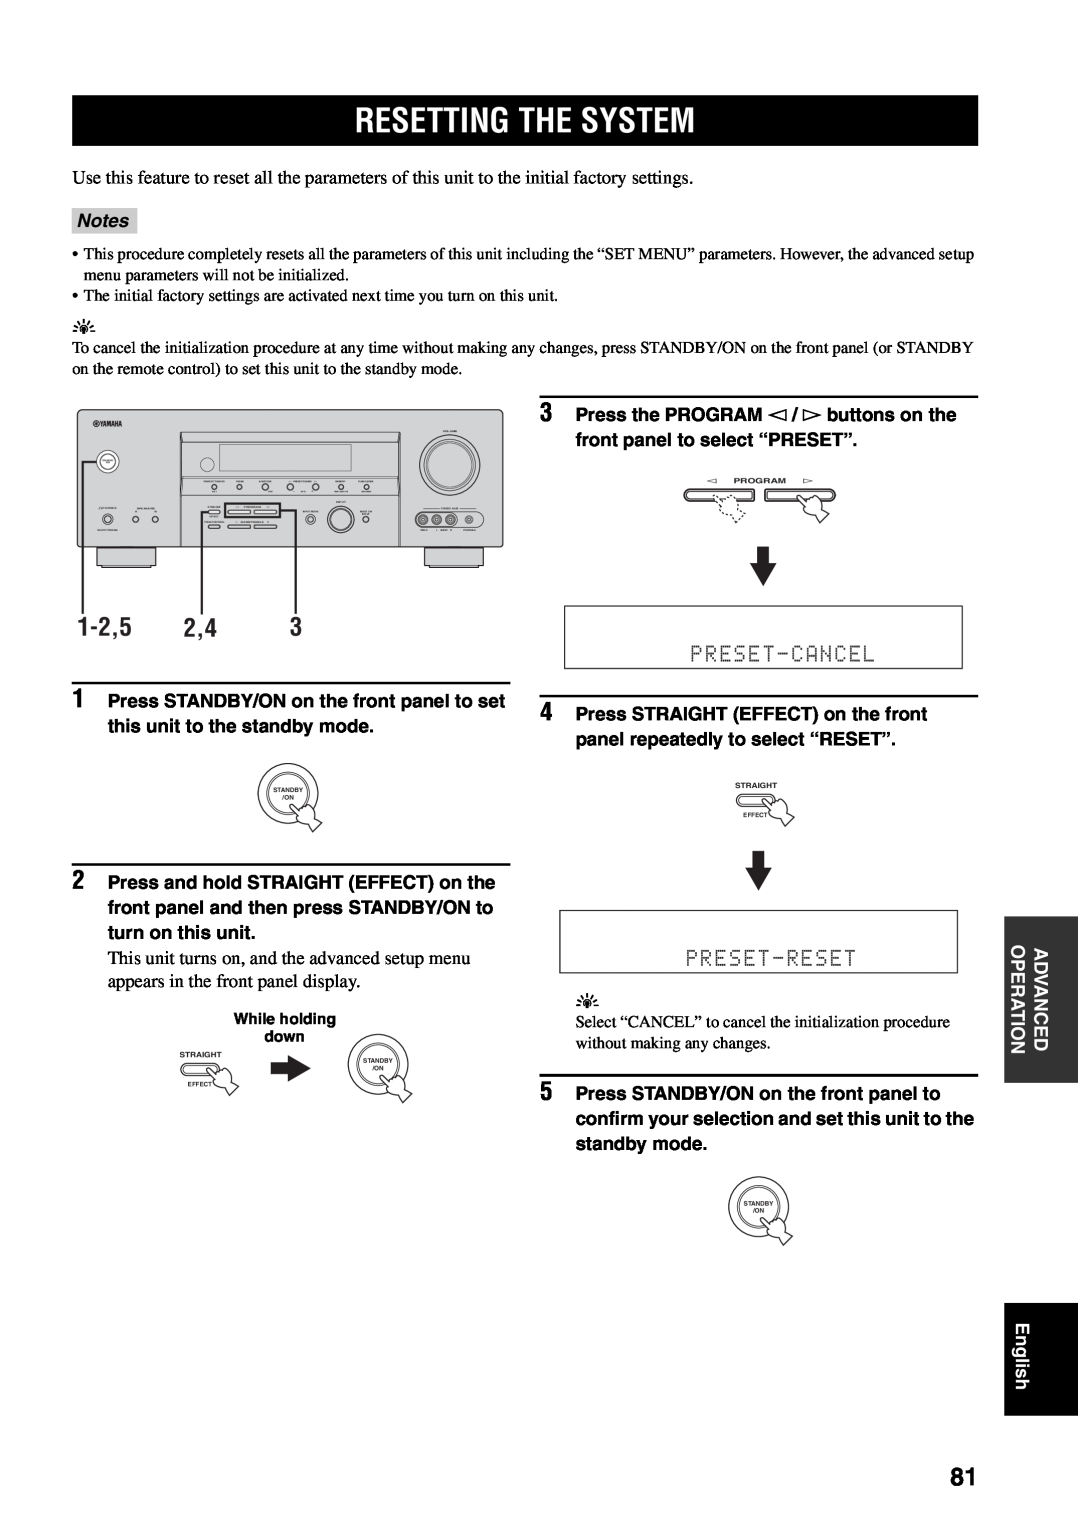 Yamaha RX-V459 owner manual Resetting The System, 1-2,52,4, Preset-Cancel, Preset-Reset, Notes 